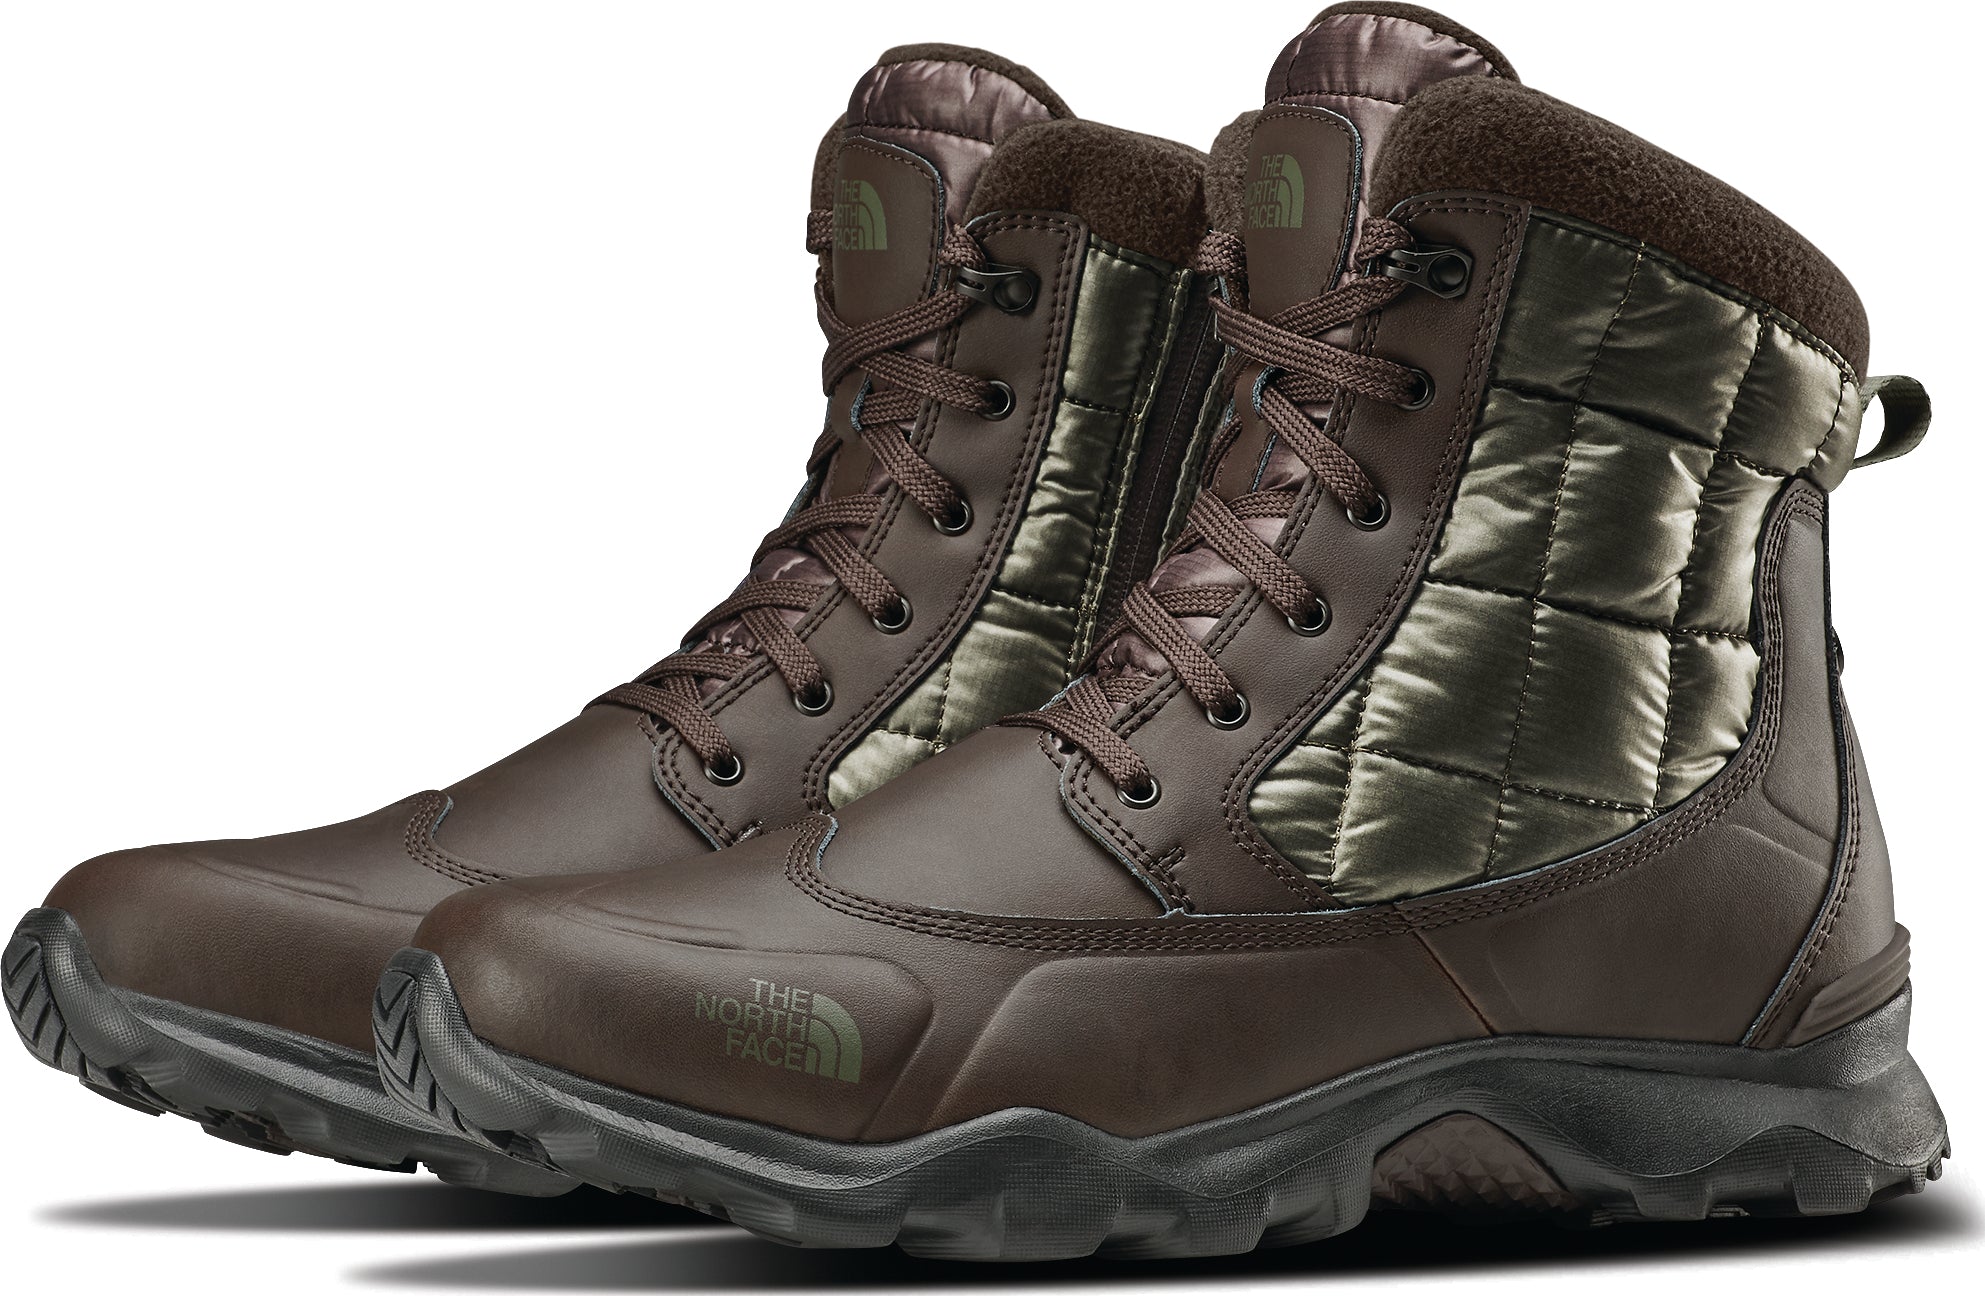 men's thermoball boot zipper